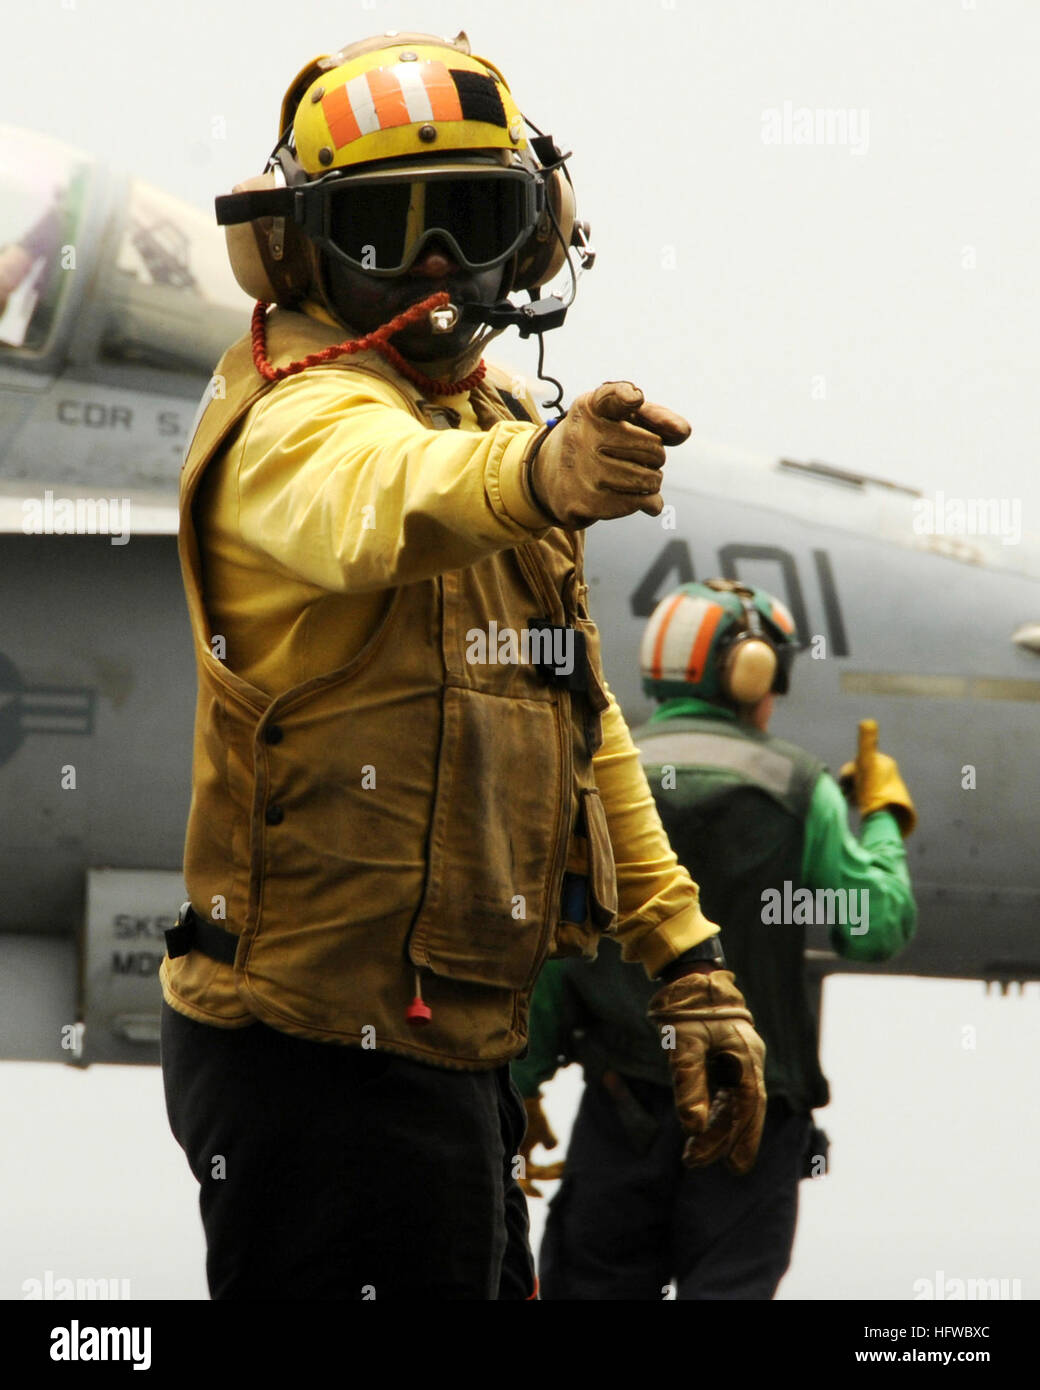 080811-N-9898L-260  NORTH ARABIAN SEA (Aug. 11, 2008) An aviation boatswain's mate (Handling) directs traffic on the flight deck of the aircraft carrier USS Abraham Lincoln (CVN 72). Lincoln is deployed to the U.S. 5th Fleet area of responsibility to support Operations Iraqi Freedom and Enduring Freedom as well as maritime security operations. (U.S. Navy photo by Mass Communication Specialist 3rd Class Geoffrey Lewis/Released) US Navy 080811-N-9898L-260 n aviation boatswain's mate (Handling) directs traffic on the flight deck of the aircraft carrier USS Abraham Lincoln (CVN 72) Stock Photo